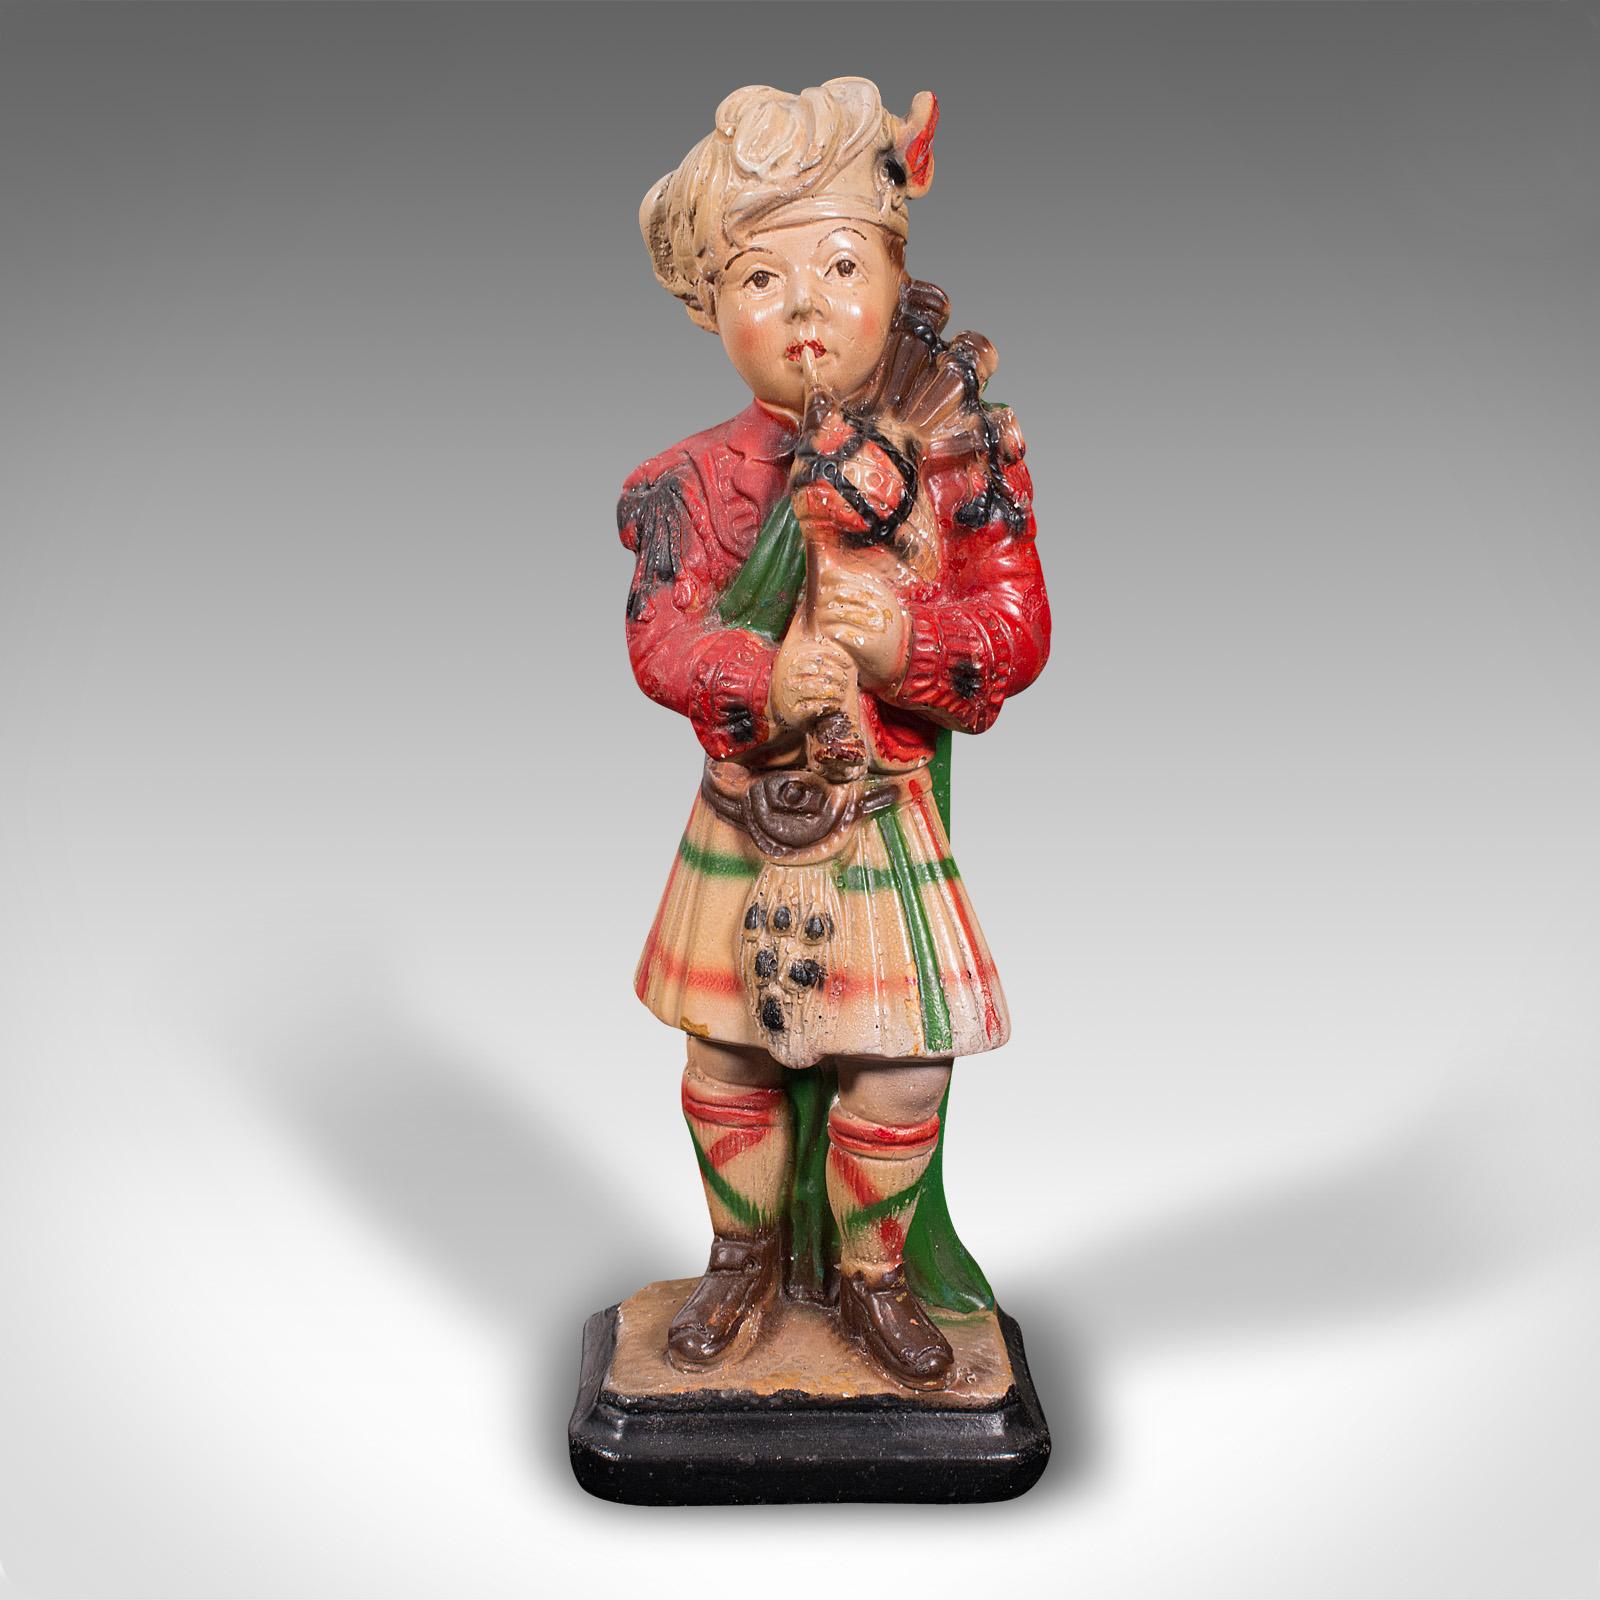 This is an antique decorative piper figure. A Scottish, plaster statue in the manner of a Scots Guard, dating to the late Victorian period, circa 1900.

Delightfully charming figure with appeal for Scots and collectors
Displays a desirable aged